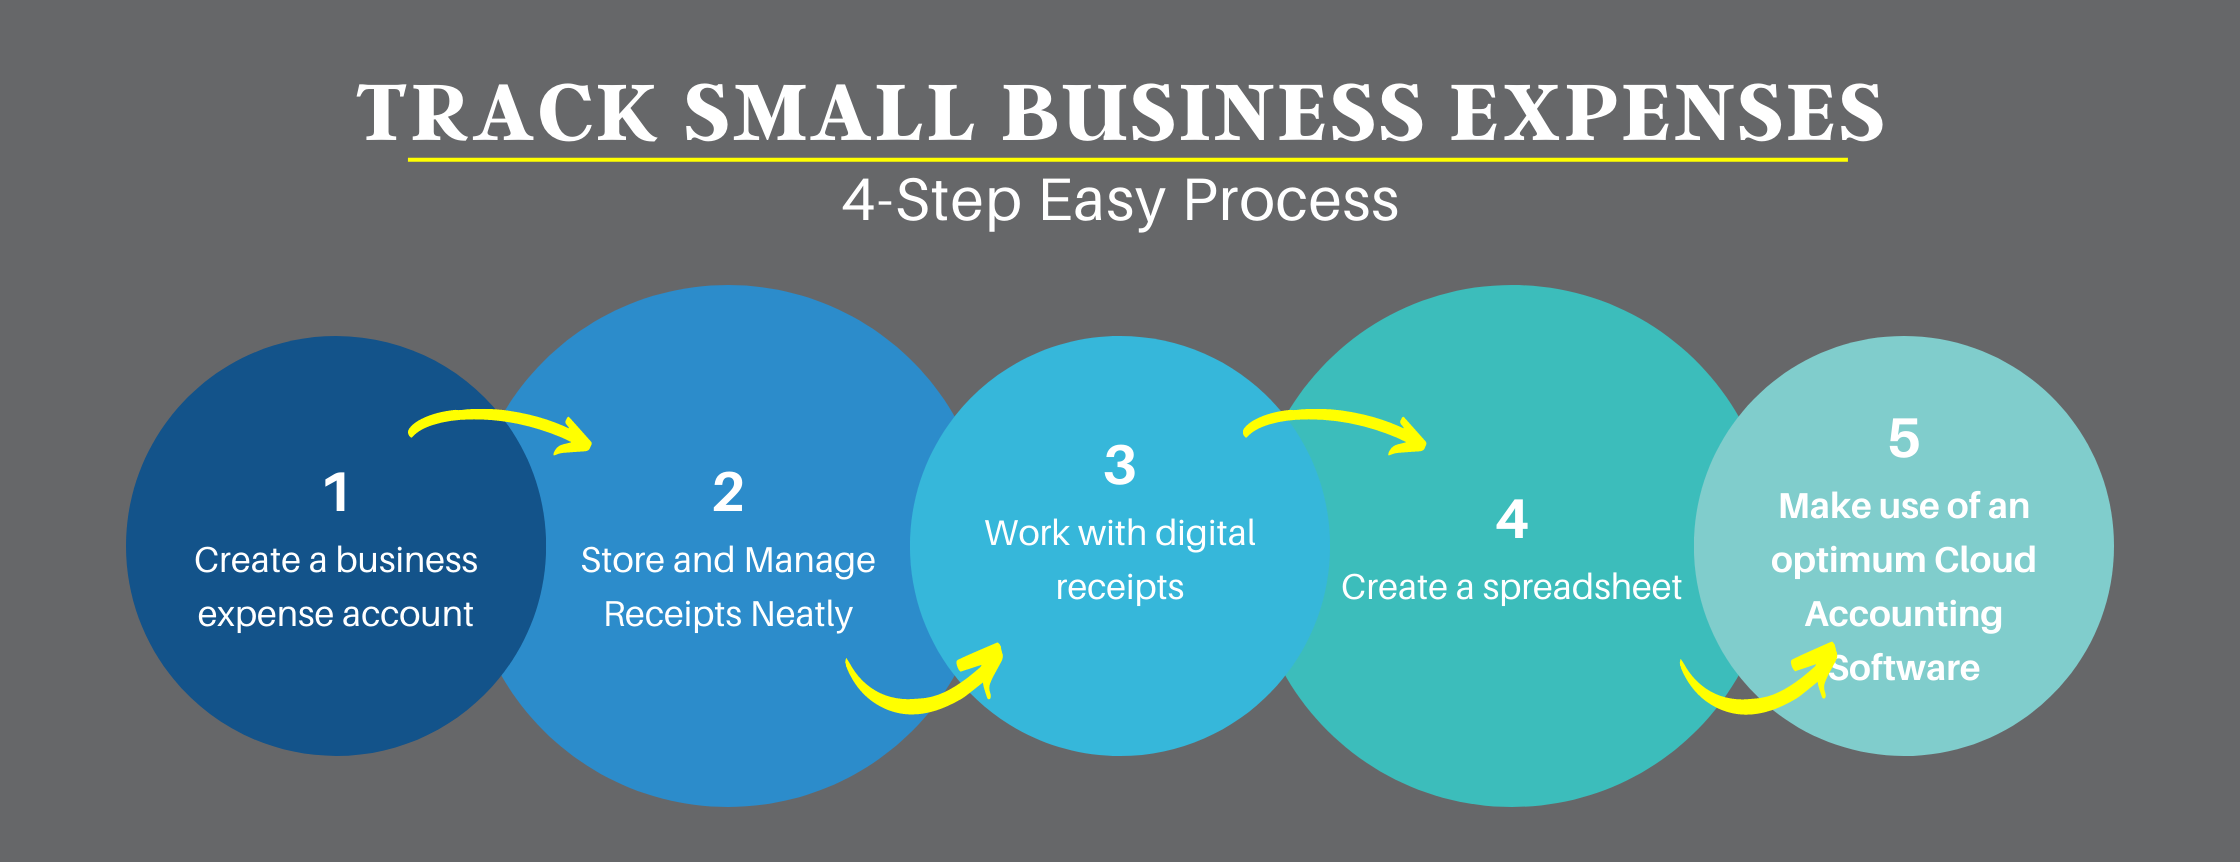 4 Steps To Track Small Business Expense